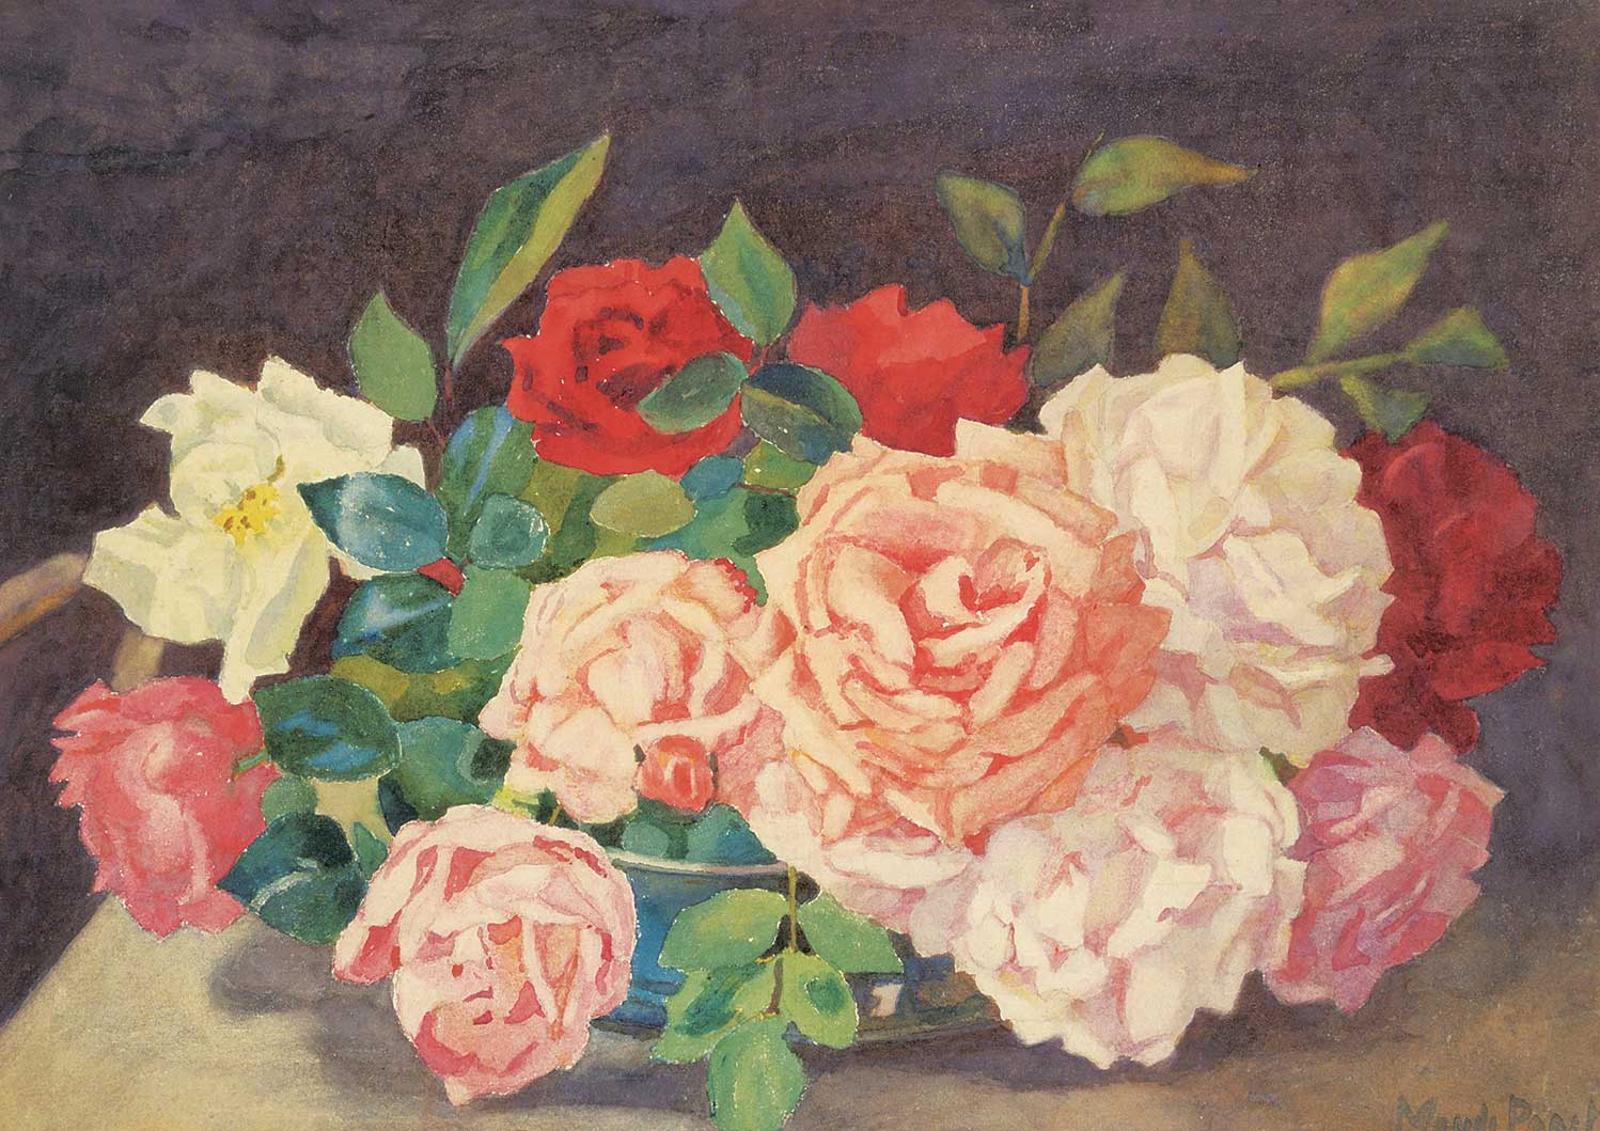 Maude Dekirkby Paget - Untitled - Still Life with Roses